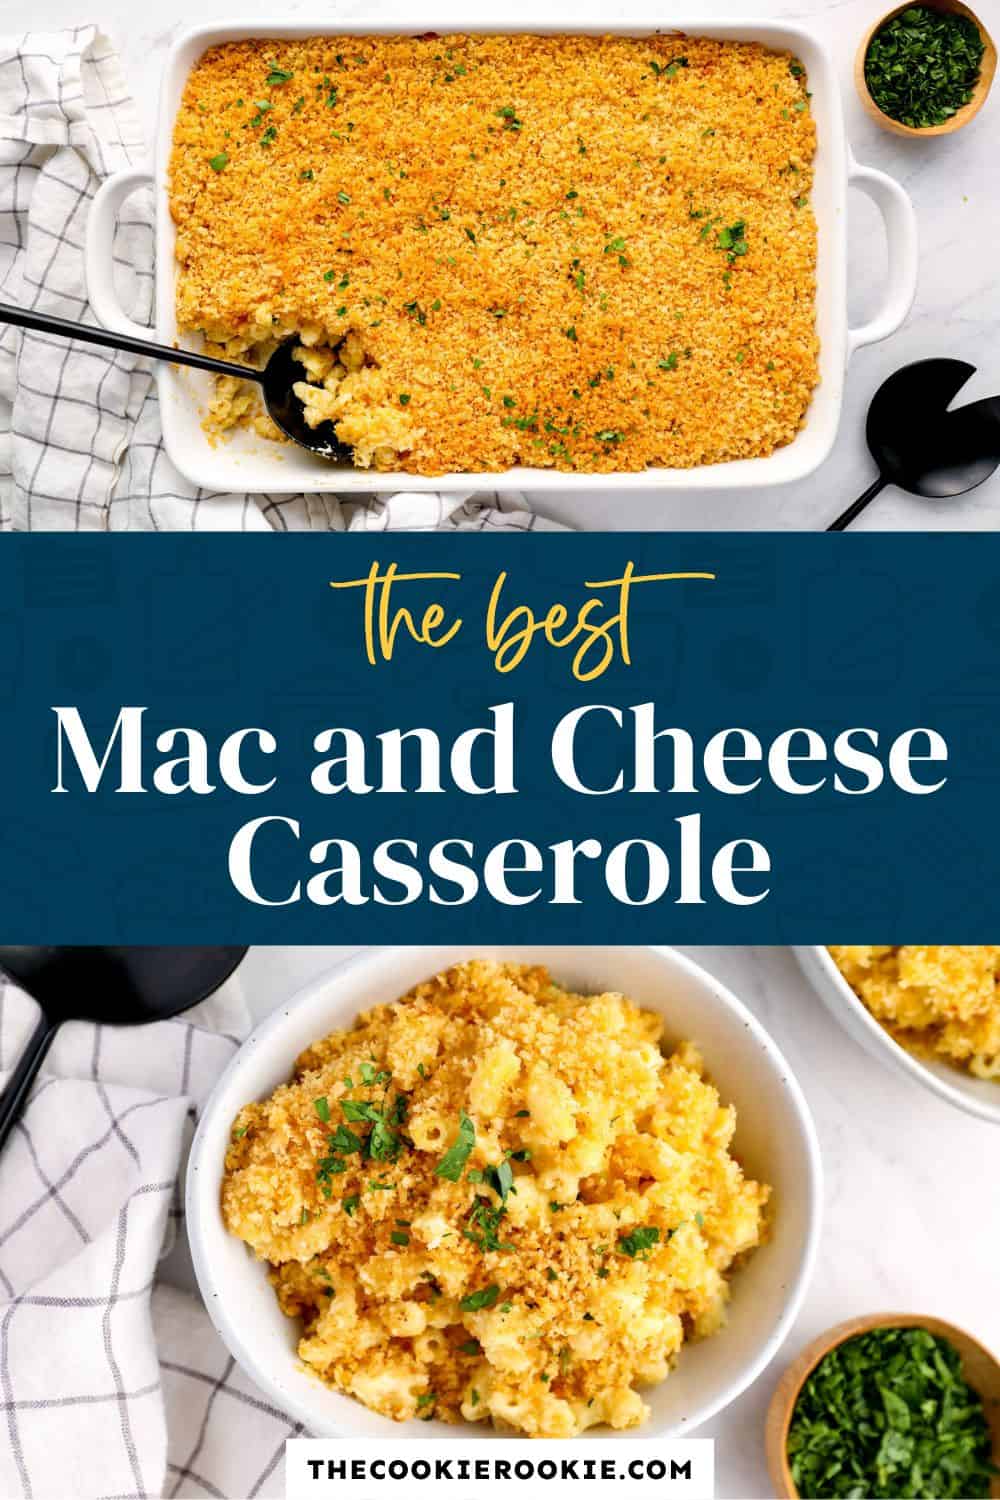 Mac and Cheese Casserole Recipe - The Cookie Rookie®